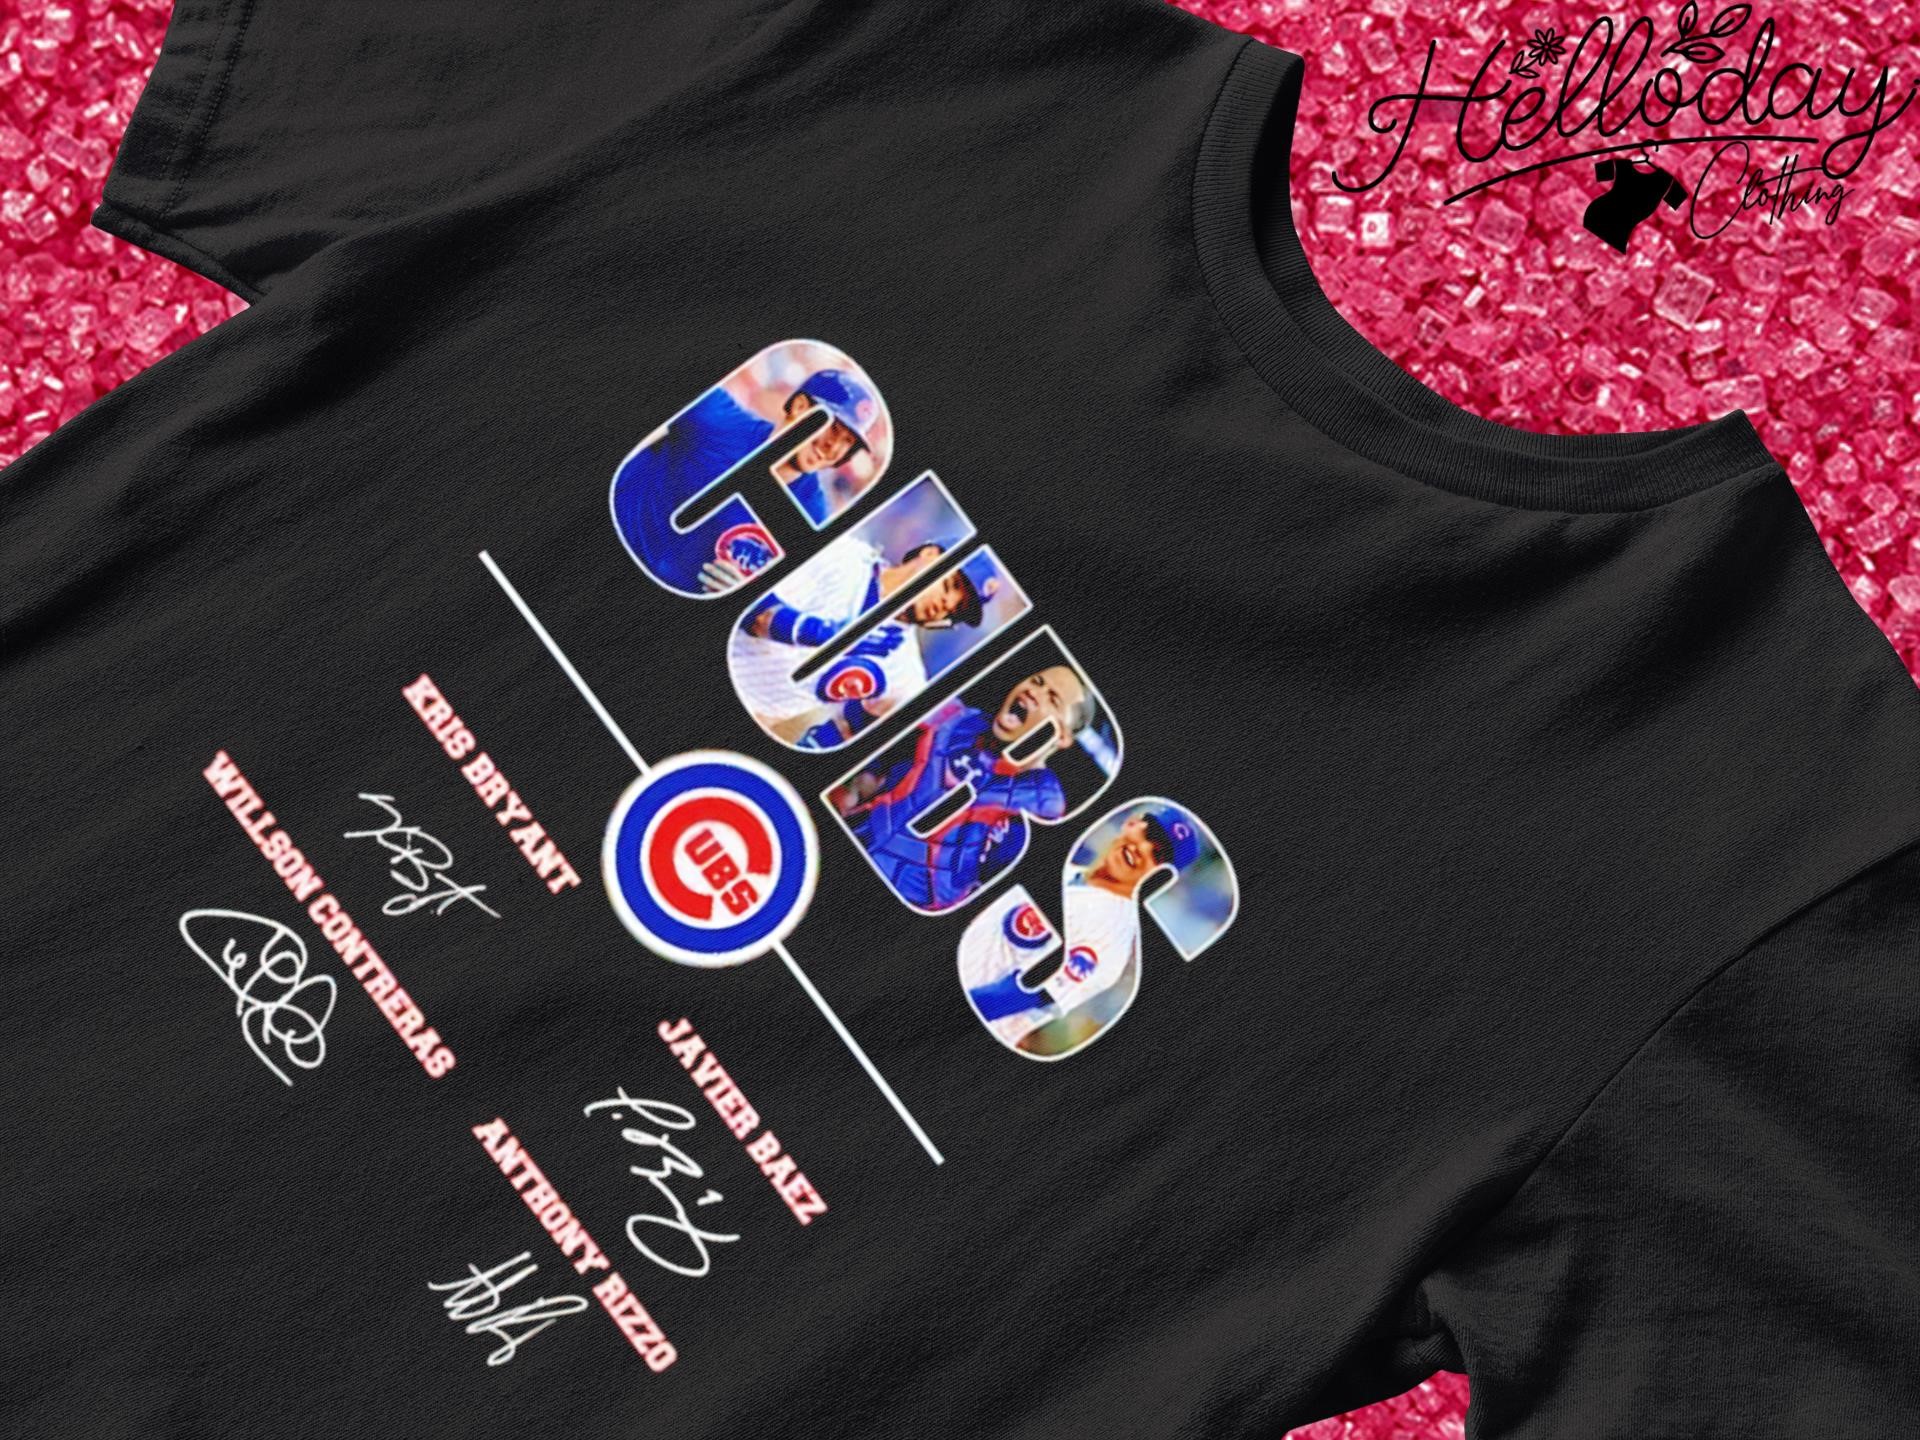 Chicago Cubs Kris Bryant Javier Baez Willson Contreras and Anthony Rizzo signature shirt